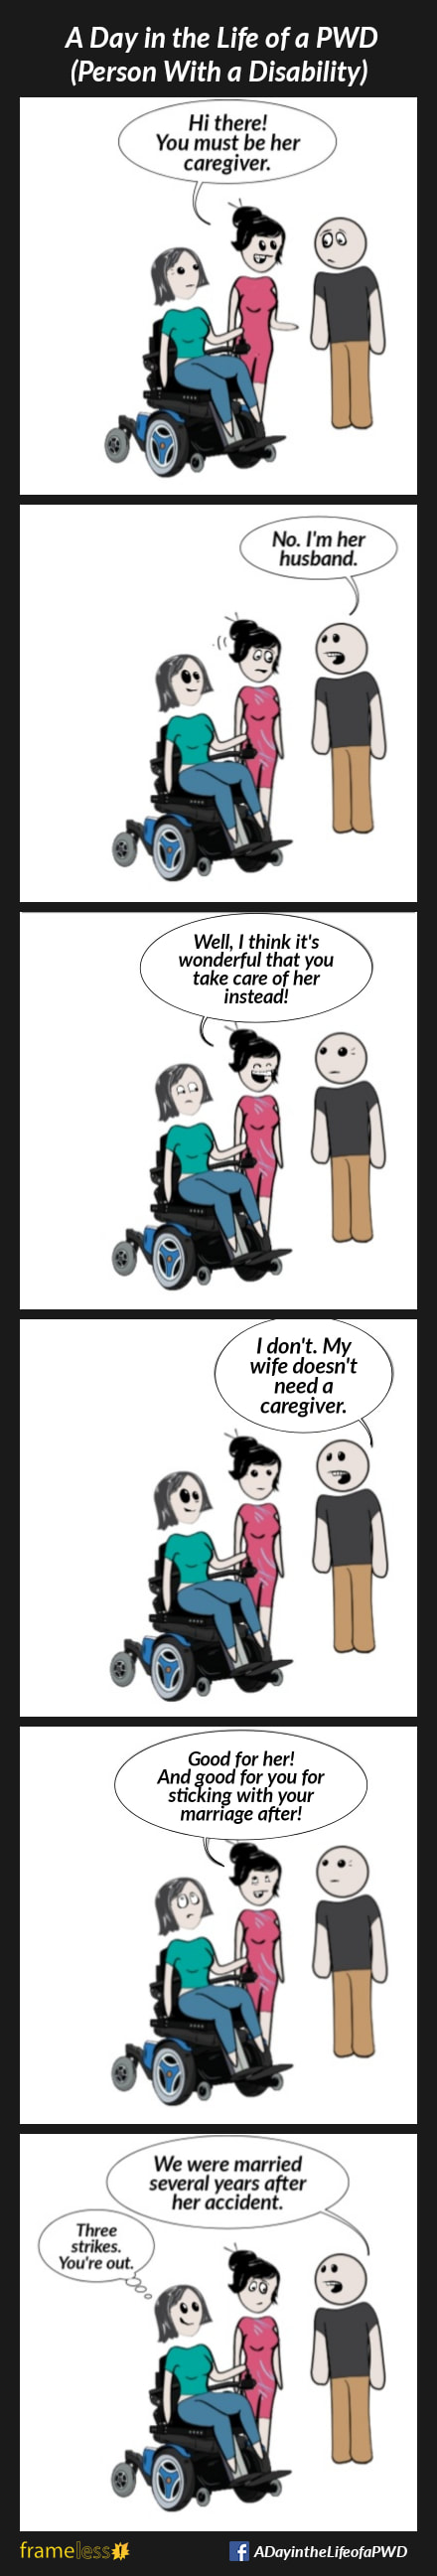 COMIC STRIP 
A Day in the Life of a PWD (Person With a Disability) 

Frame 1:
A wife in a power wheelchair and her husband are talking with a woman.
WOMAN (to husband): Hi there! You must be her caregiver.

Frame 2:
HUSBAND: No, I'm her husband 

Frame 3:
WOMAN: Well, I think it’s wonderful that you take care of her instead!

Frame 4:
HUSBAND: I don't. My wife doesn't need a caregiver.

Frame 5:
WOMAN: Good for her! And good for you for sticking with your marriage after!
Twife rolls her eyes.

Frame 6:
HUSBAND: We were married several years after her accident.
The wife smiles and thinks, 